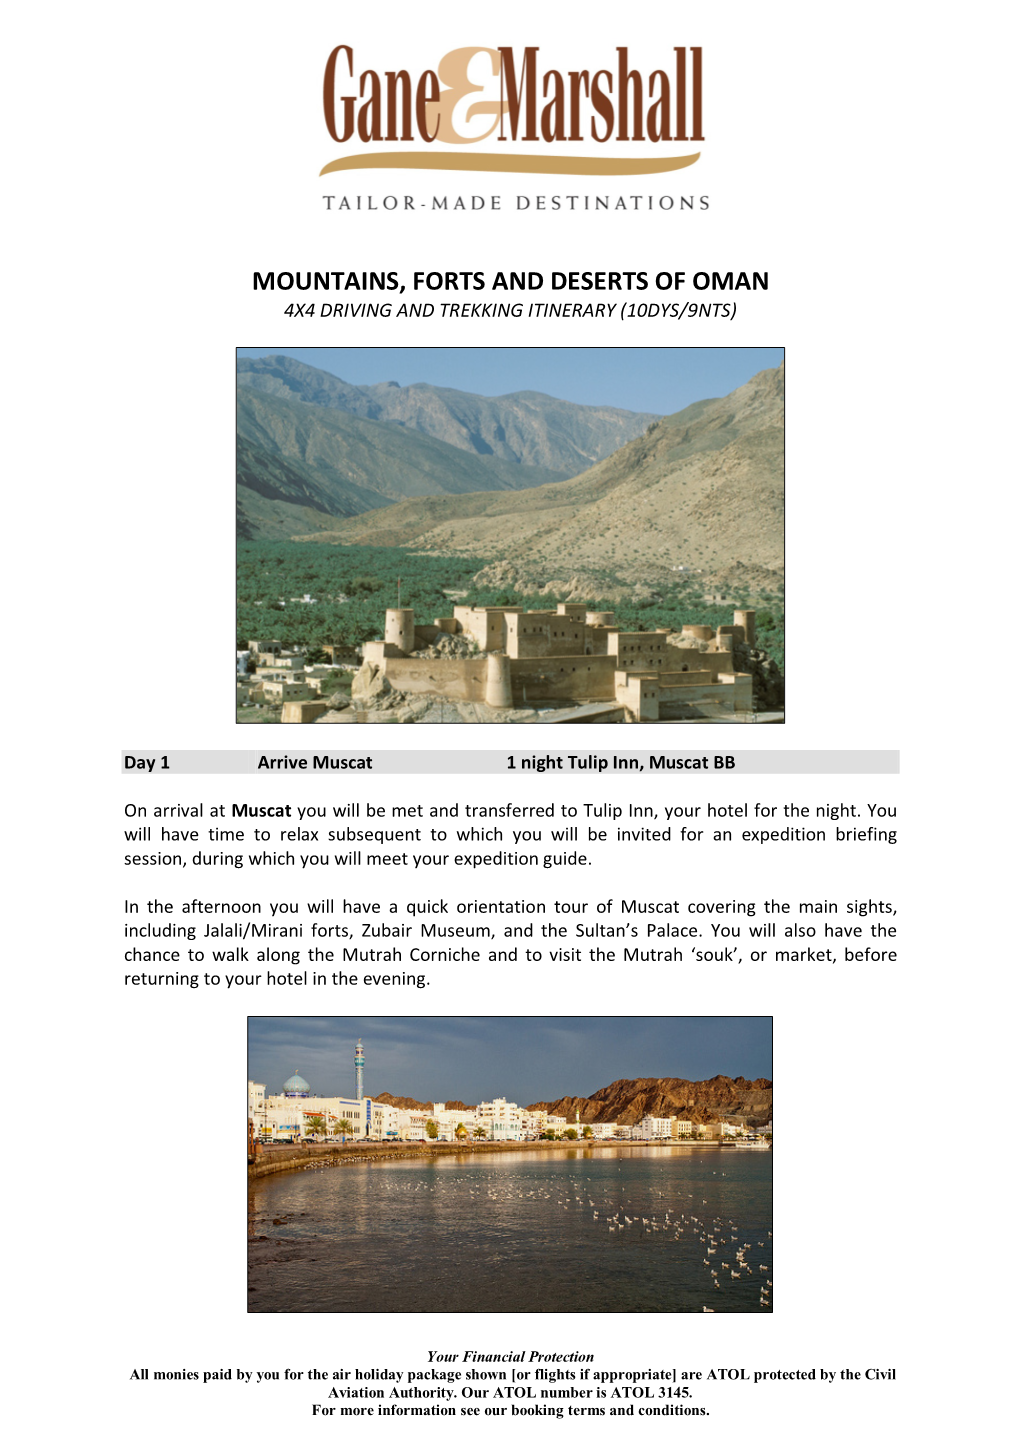 Mountains, Forts, and Deserts of Oman Holiday Itinerary